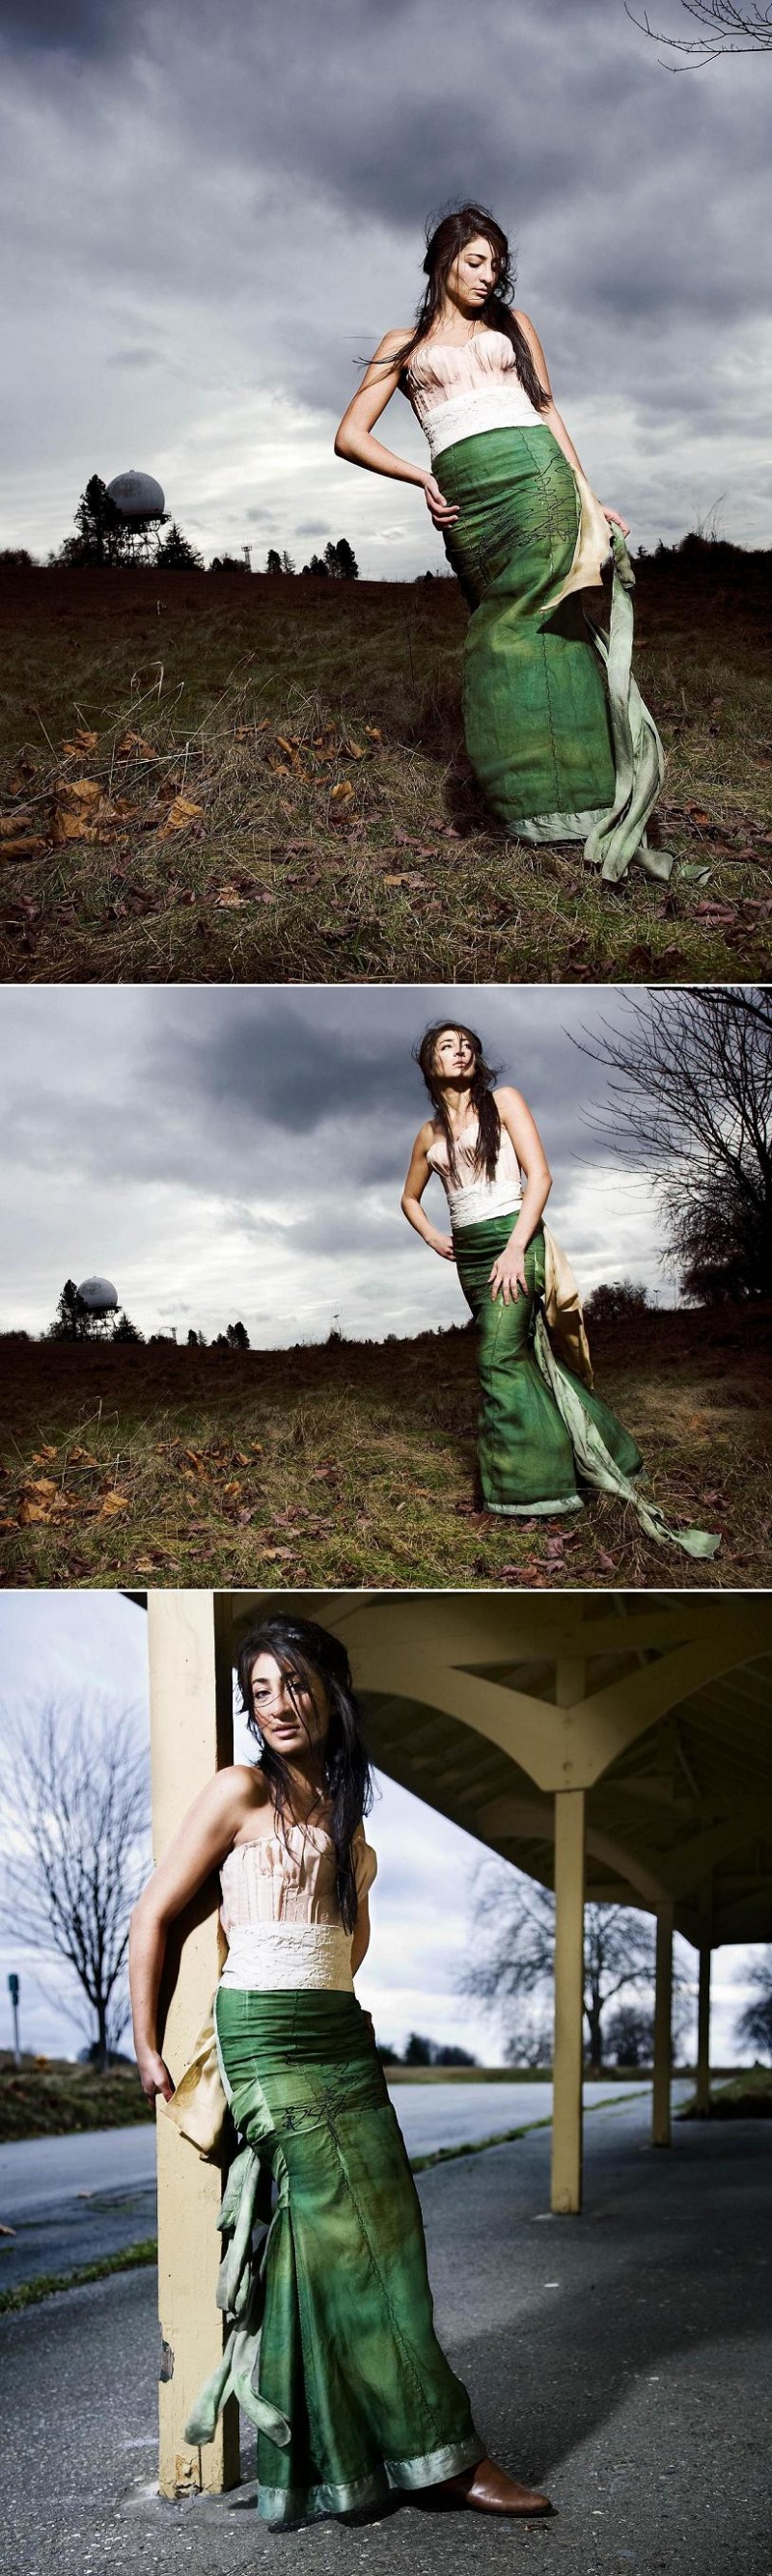 Female model photo shoot of Juliete by kg in Seattle, WA, hair styled by Oh Hey Style, wardrobe styled by Wai-Ching